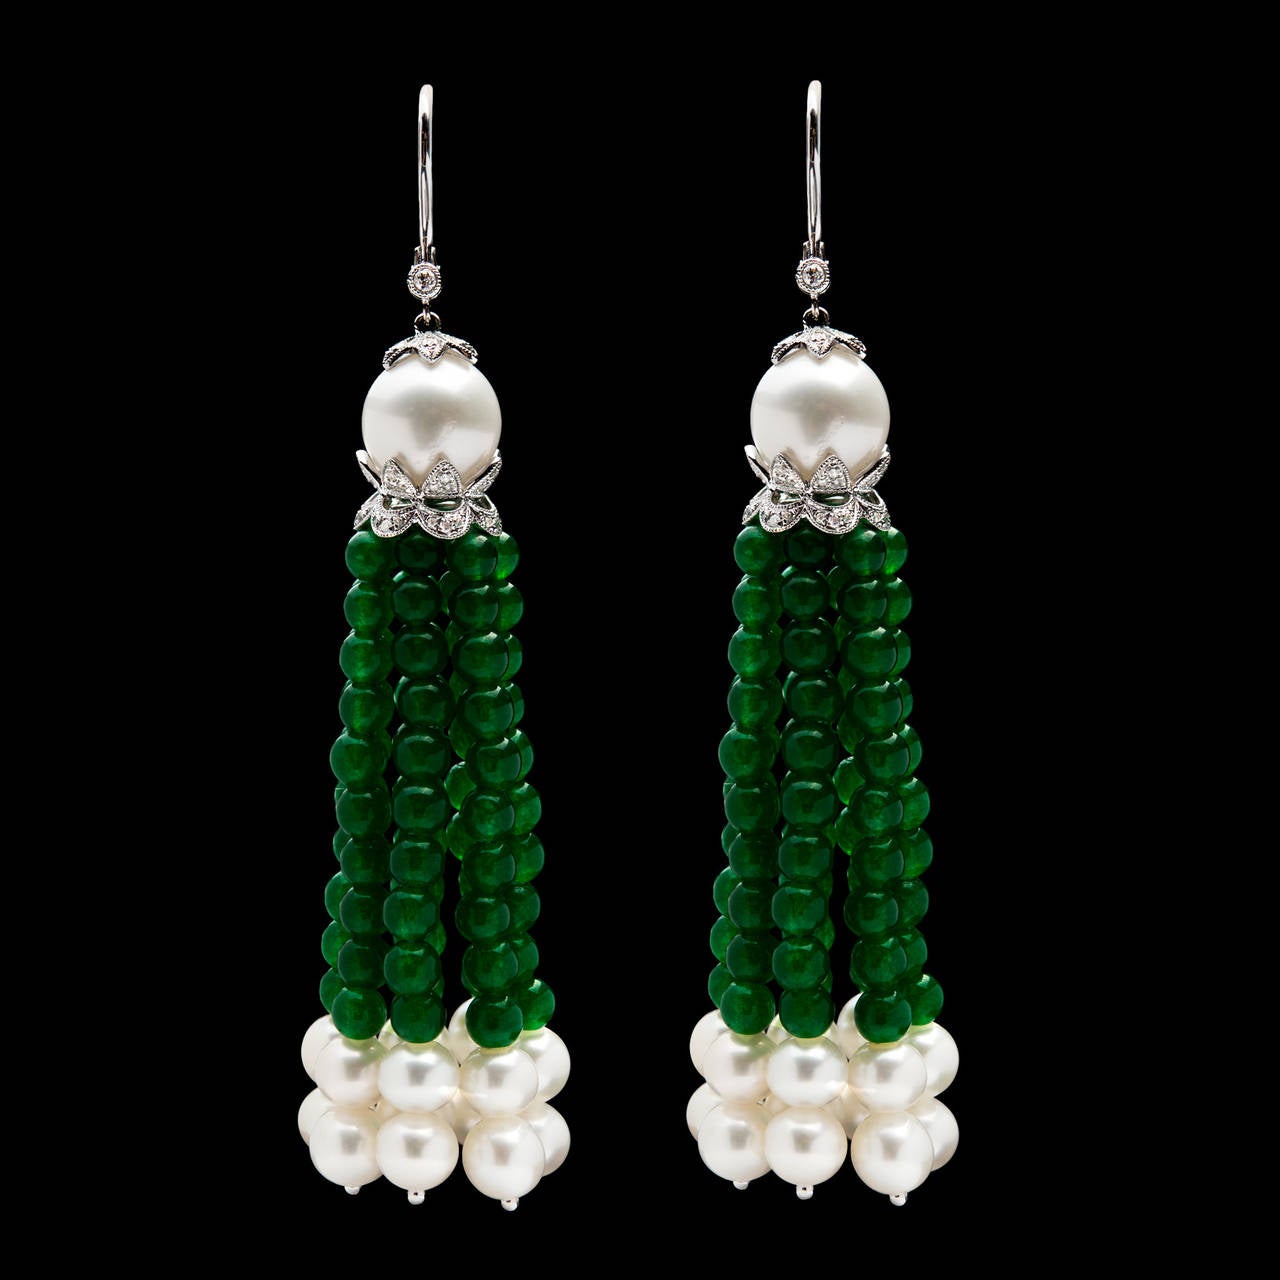 Tassel Earrings Feature Strands of Beads and Cultured Pearls Suspended from an 18Kt White Gold Milgrain Setting Enhanced with Diamonds. The earrings measure approximately 3.25 inches long.